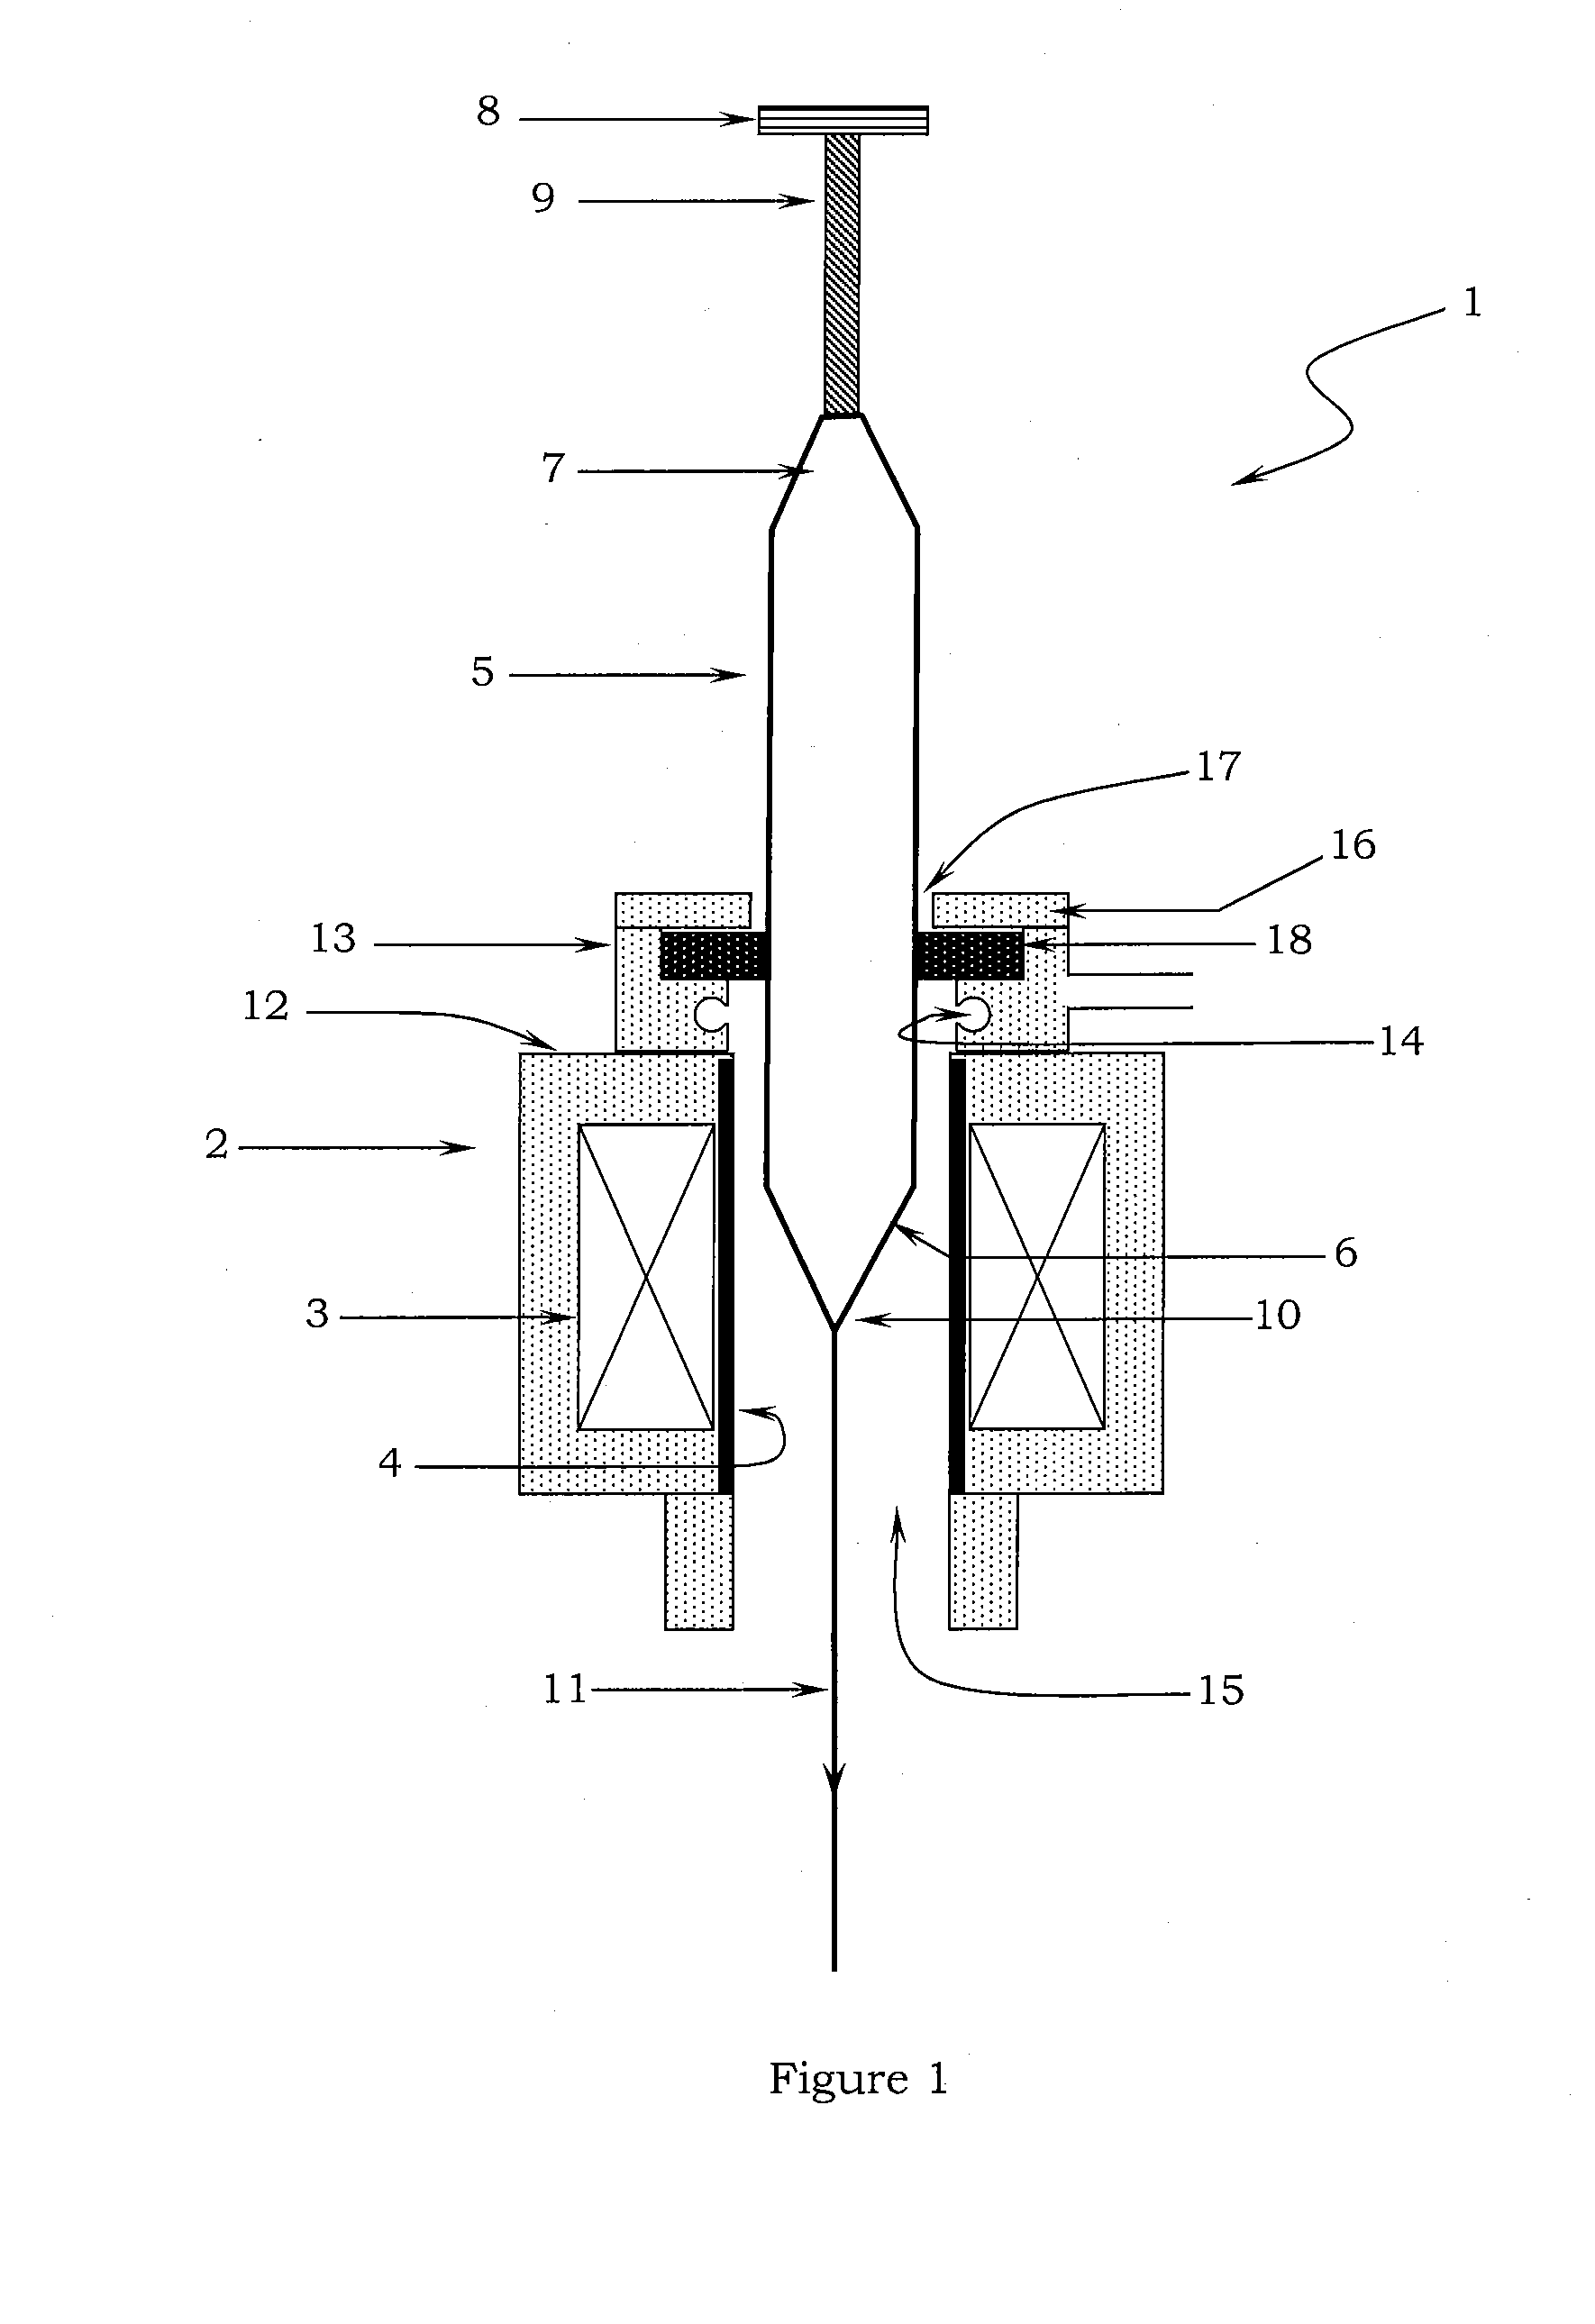 Apparatus and method for drawing an optical fiber having reduced and low attenuation loss, and optical fiber produced therefrom